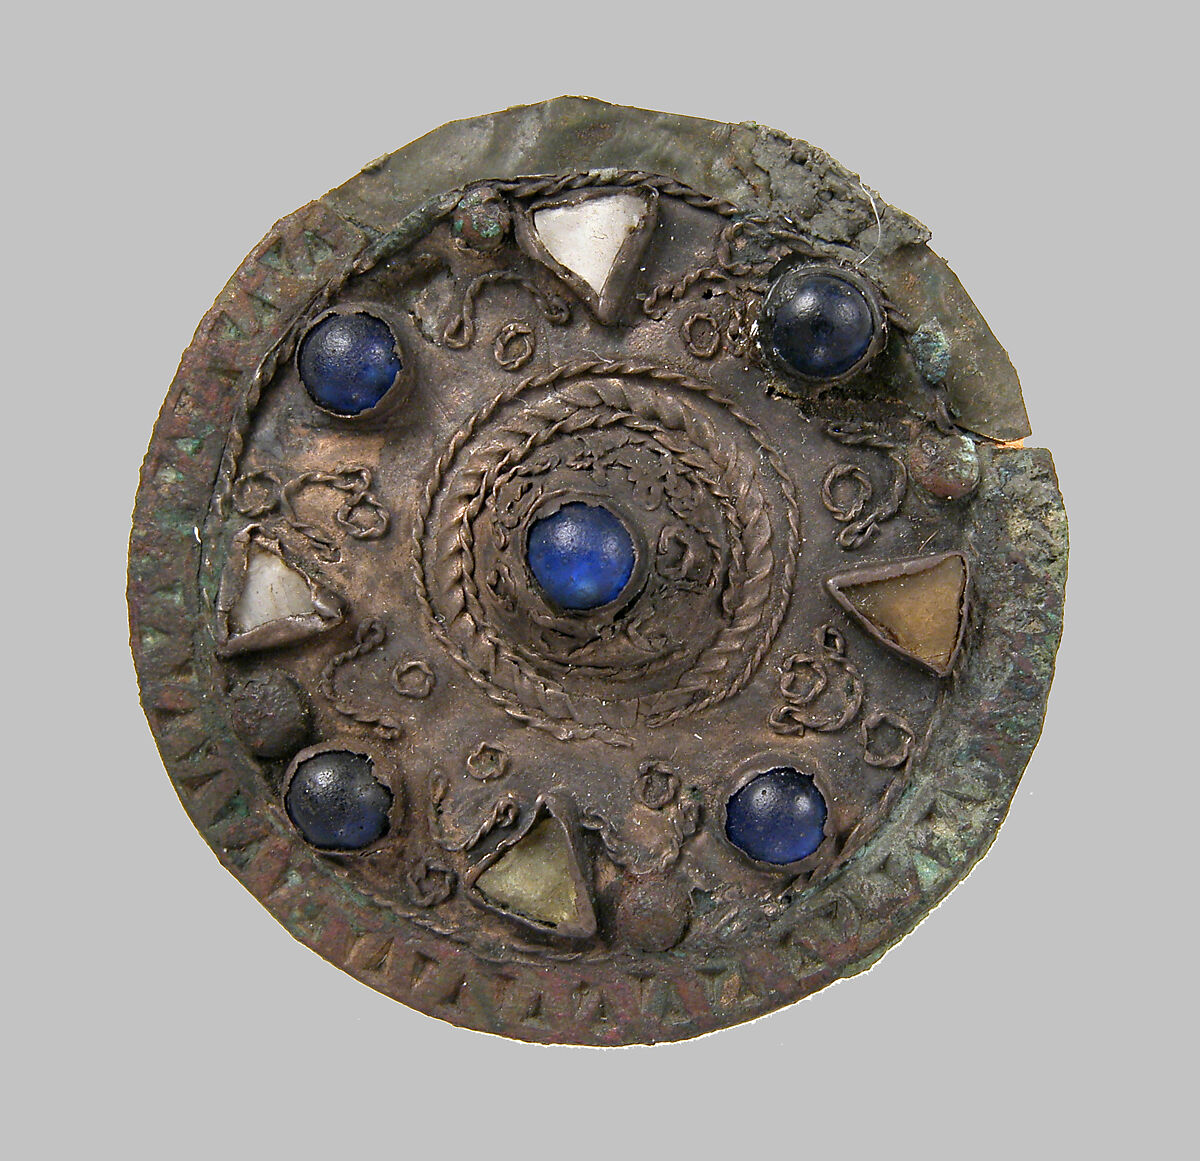 Disk Brooch, Silver, wire, glass paste, copper alloy core, cabochons, Frankish or Northern French 